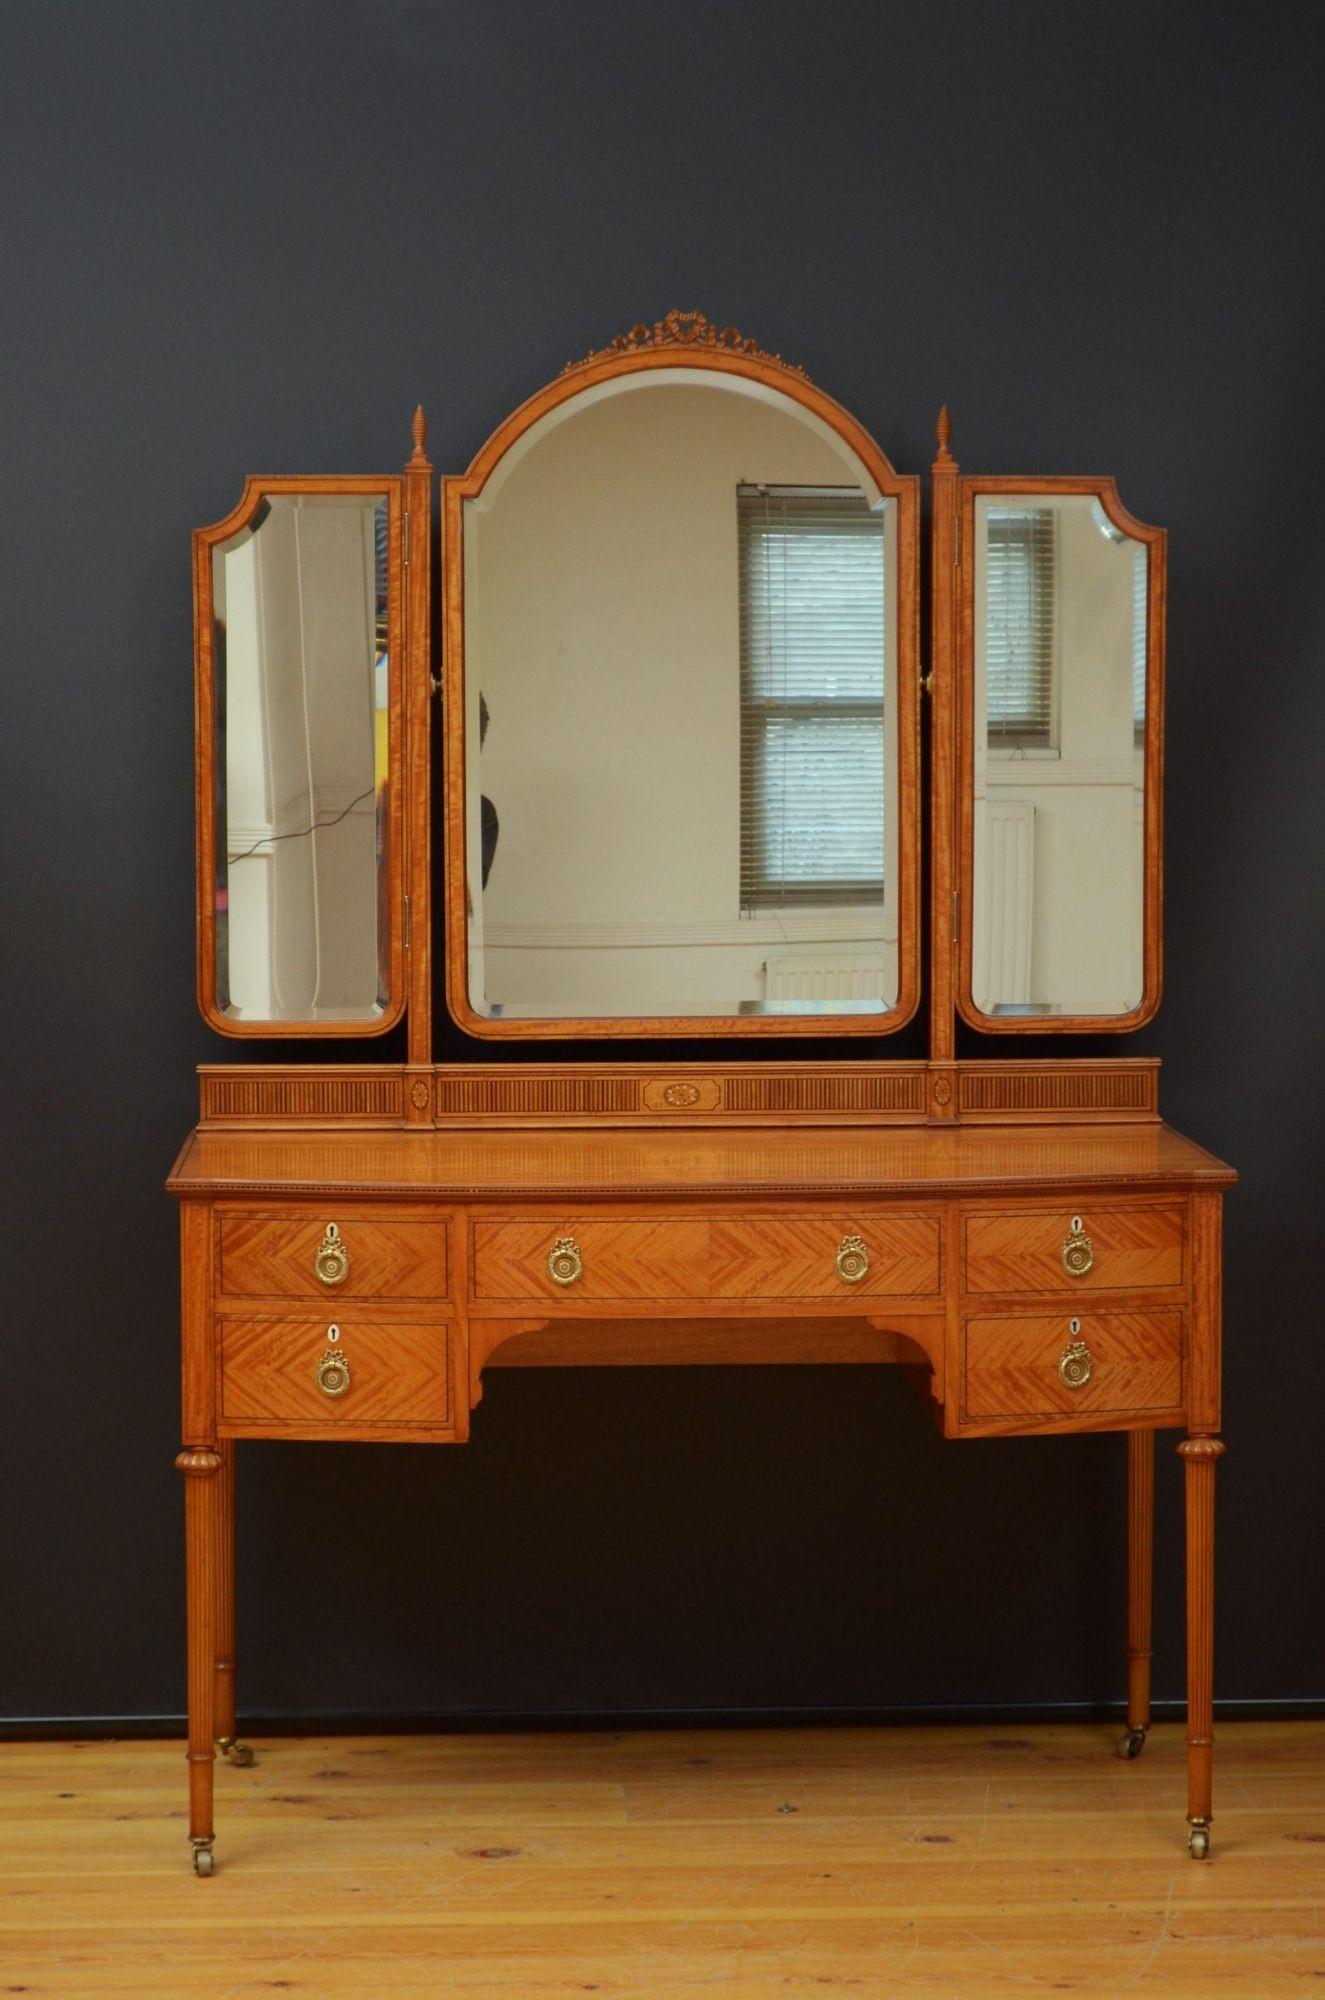 Sn5532 Fine quality and very elegant Edwardian dressing table in satinwood of bowfronted design, having arched centre mirror flanked by two swing mirrors, all with bevelled edge and decorated with turned beehive finials above an inlaid top with